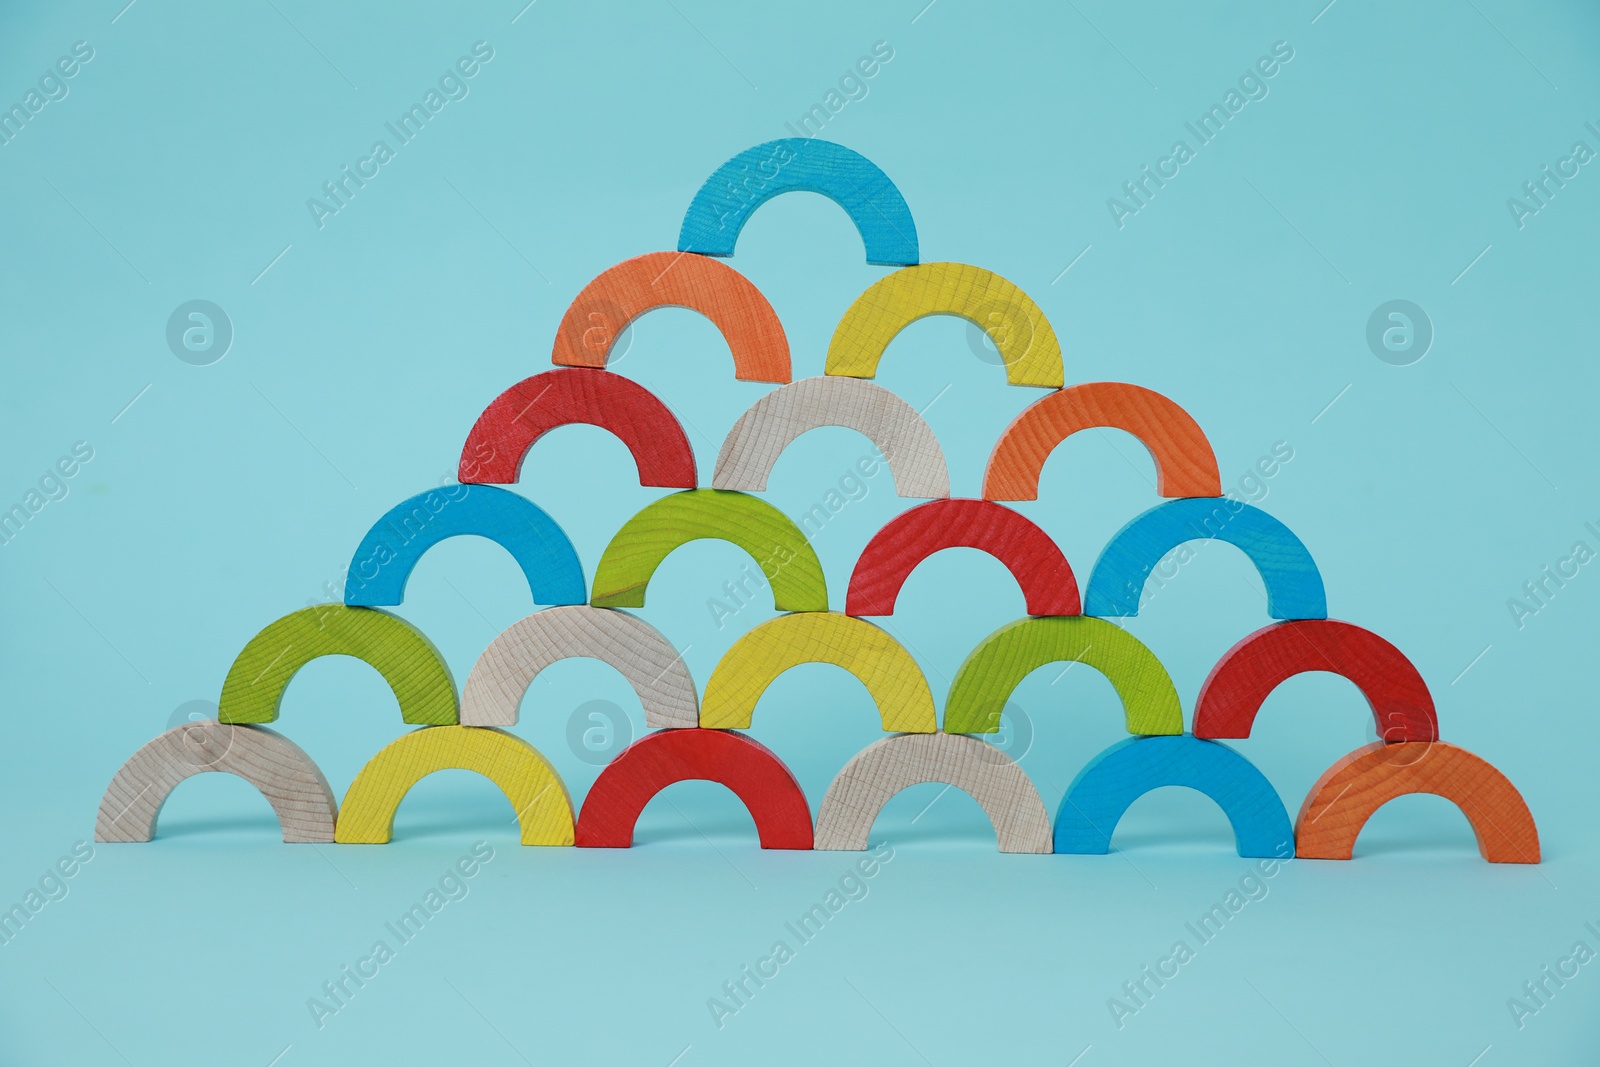 Photo of Colorful wooden pieces of playing set on light blue background. Educational toy for motor skills development